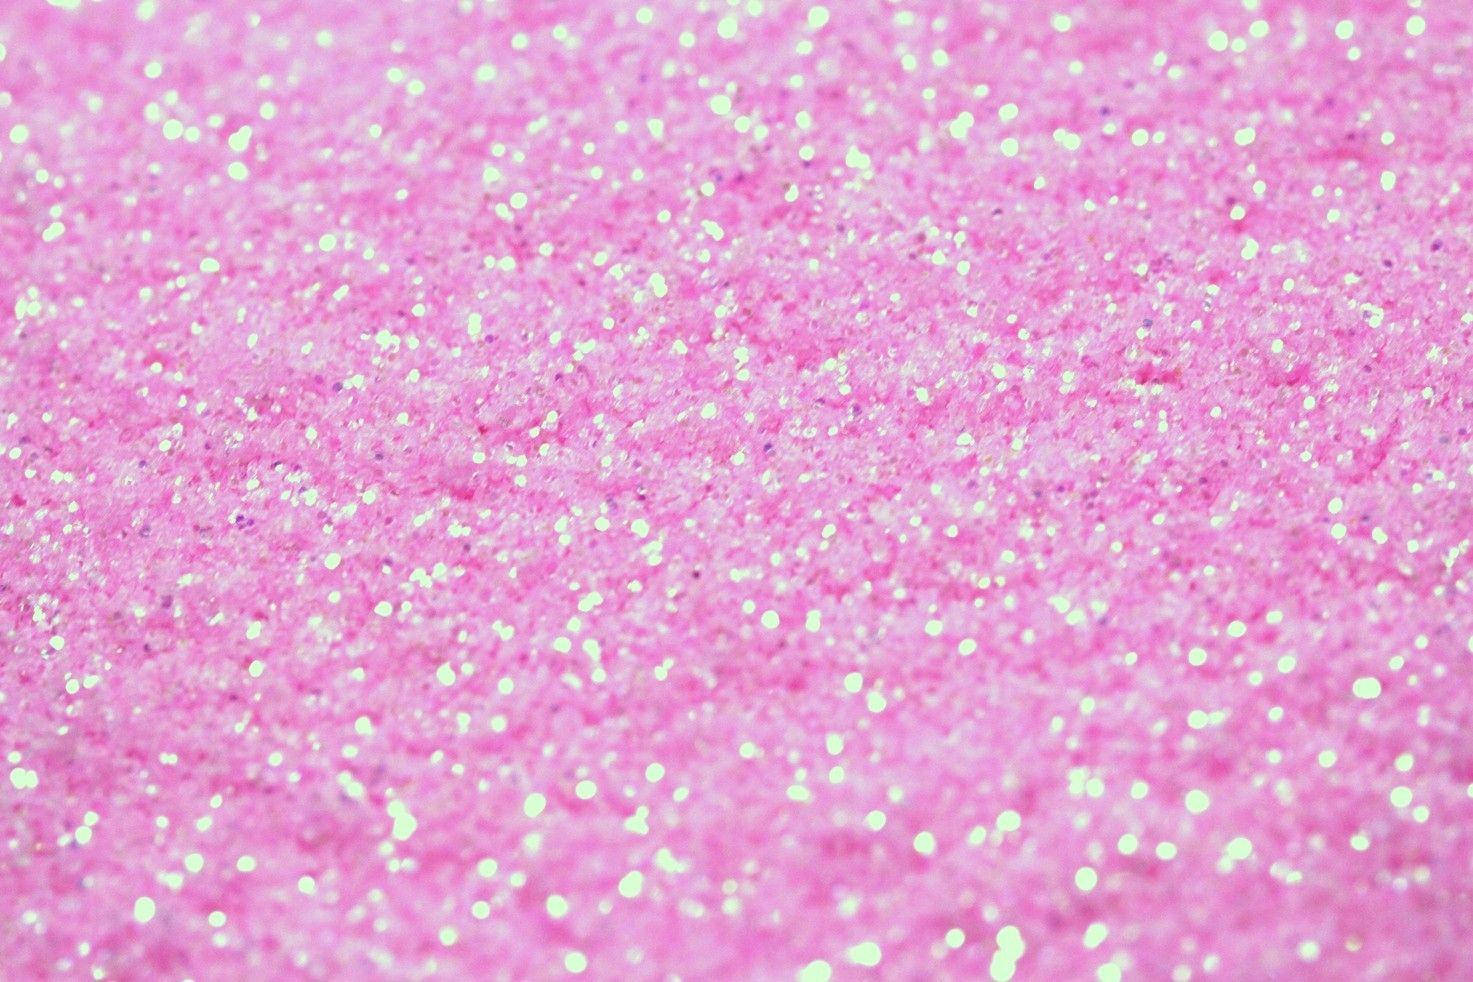 Free Pink Glitter Wallpaper Downloads, [100+] Pink Glitter Wallpapers for  FREE 